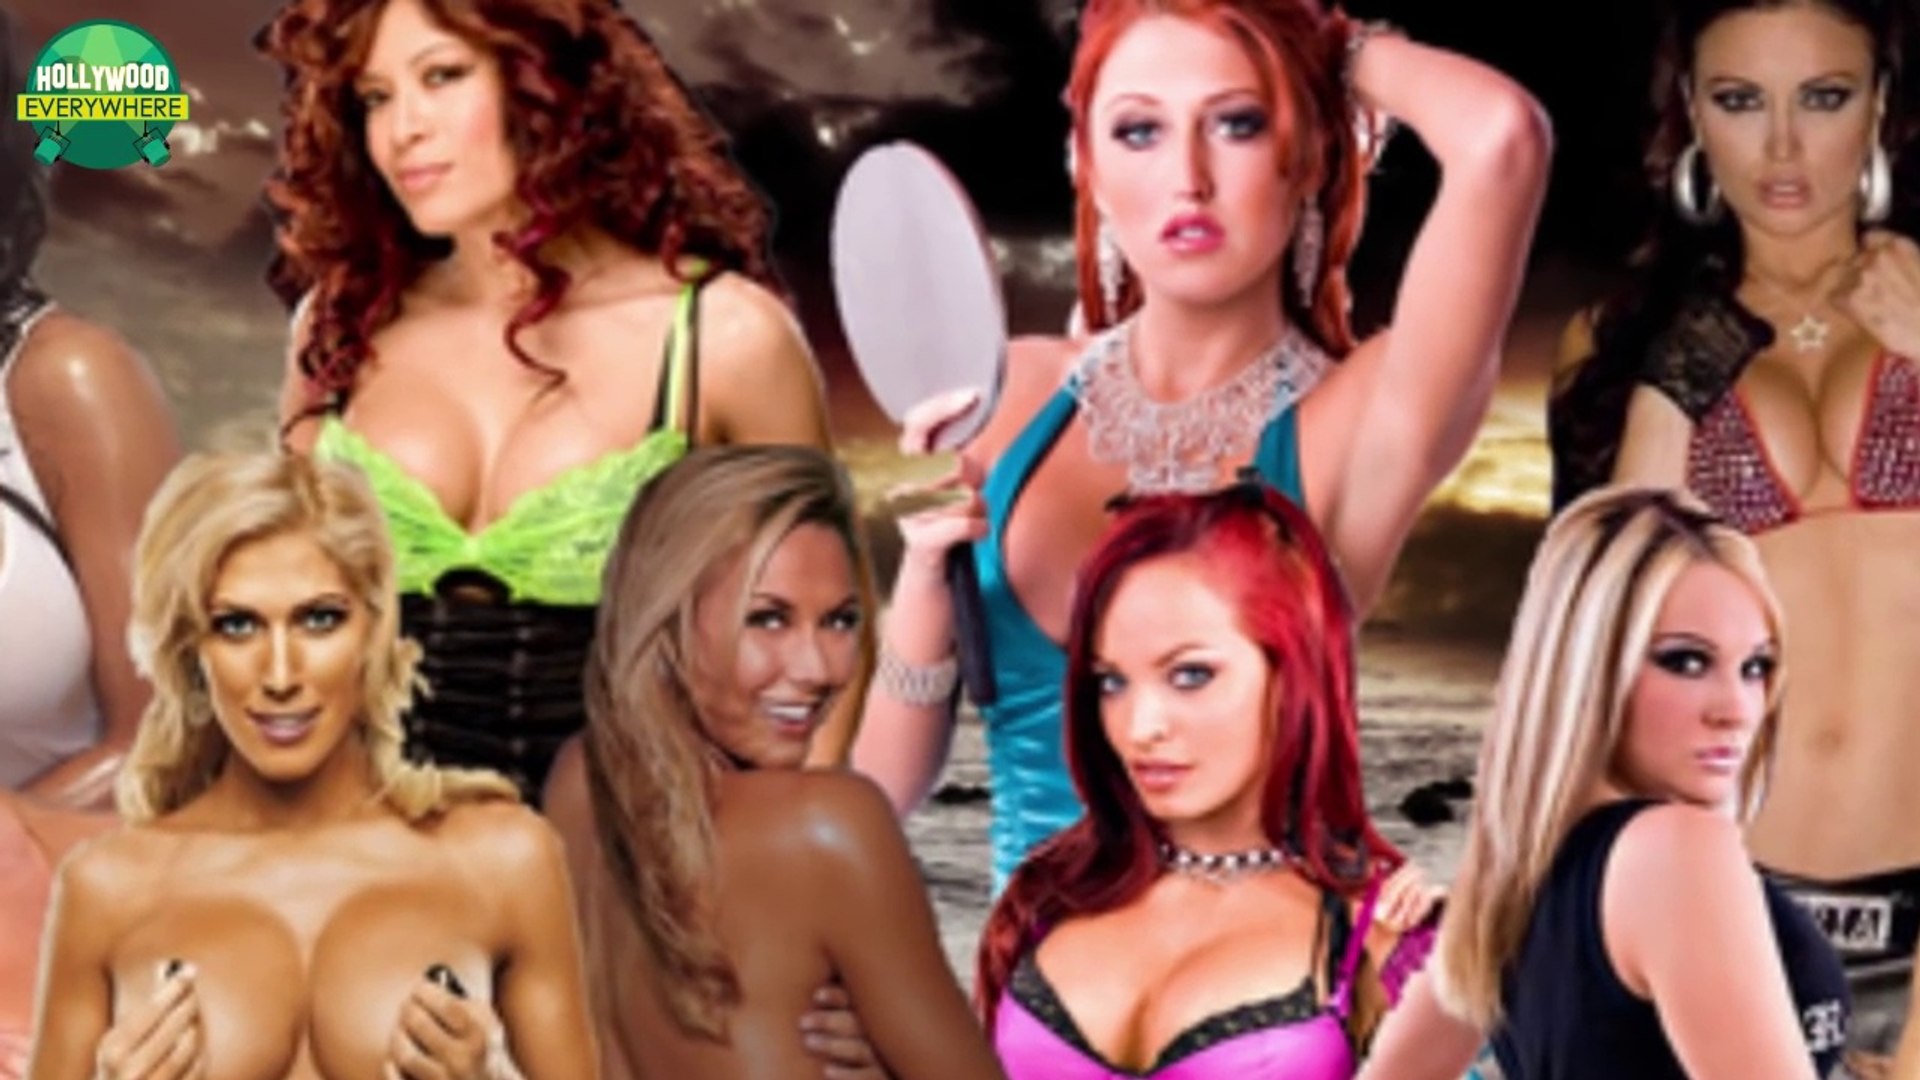 Actor Porn Xxx Wwe - Top Hot WWE Divas Who Did PORN - Check Out (WWE Wrestlers Superstars  Secrets) - video Dailymotion